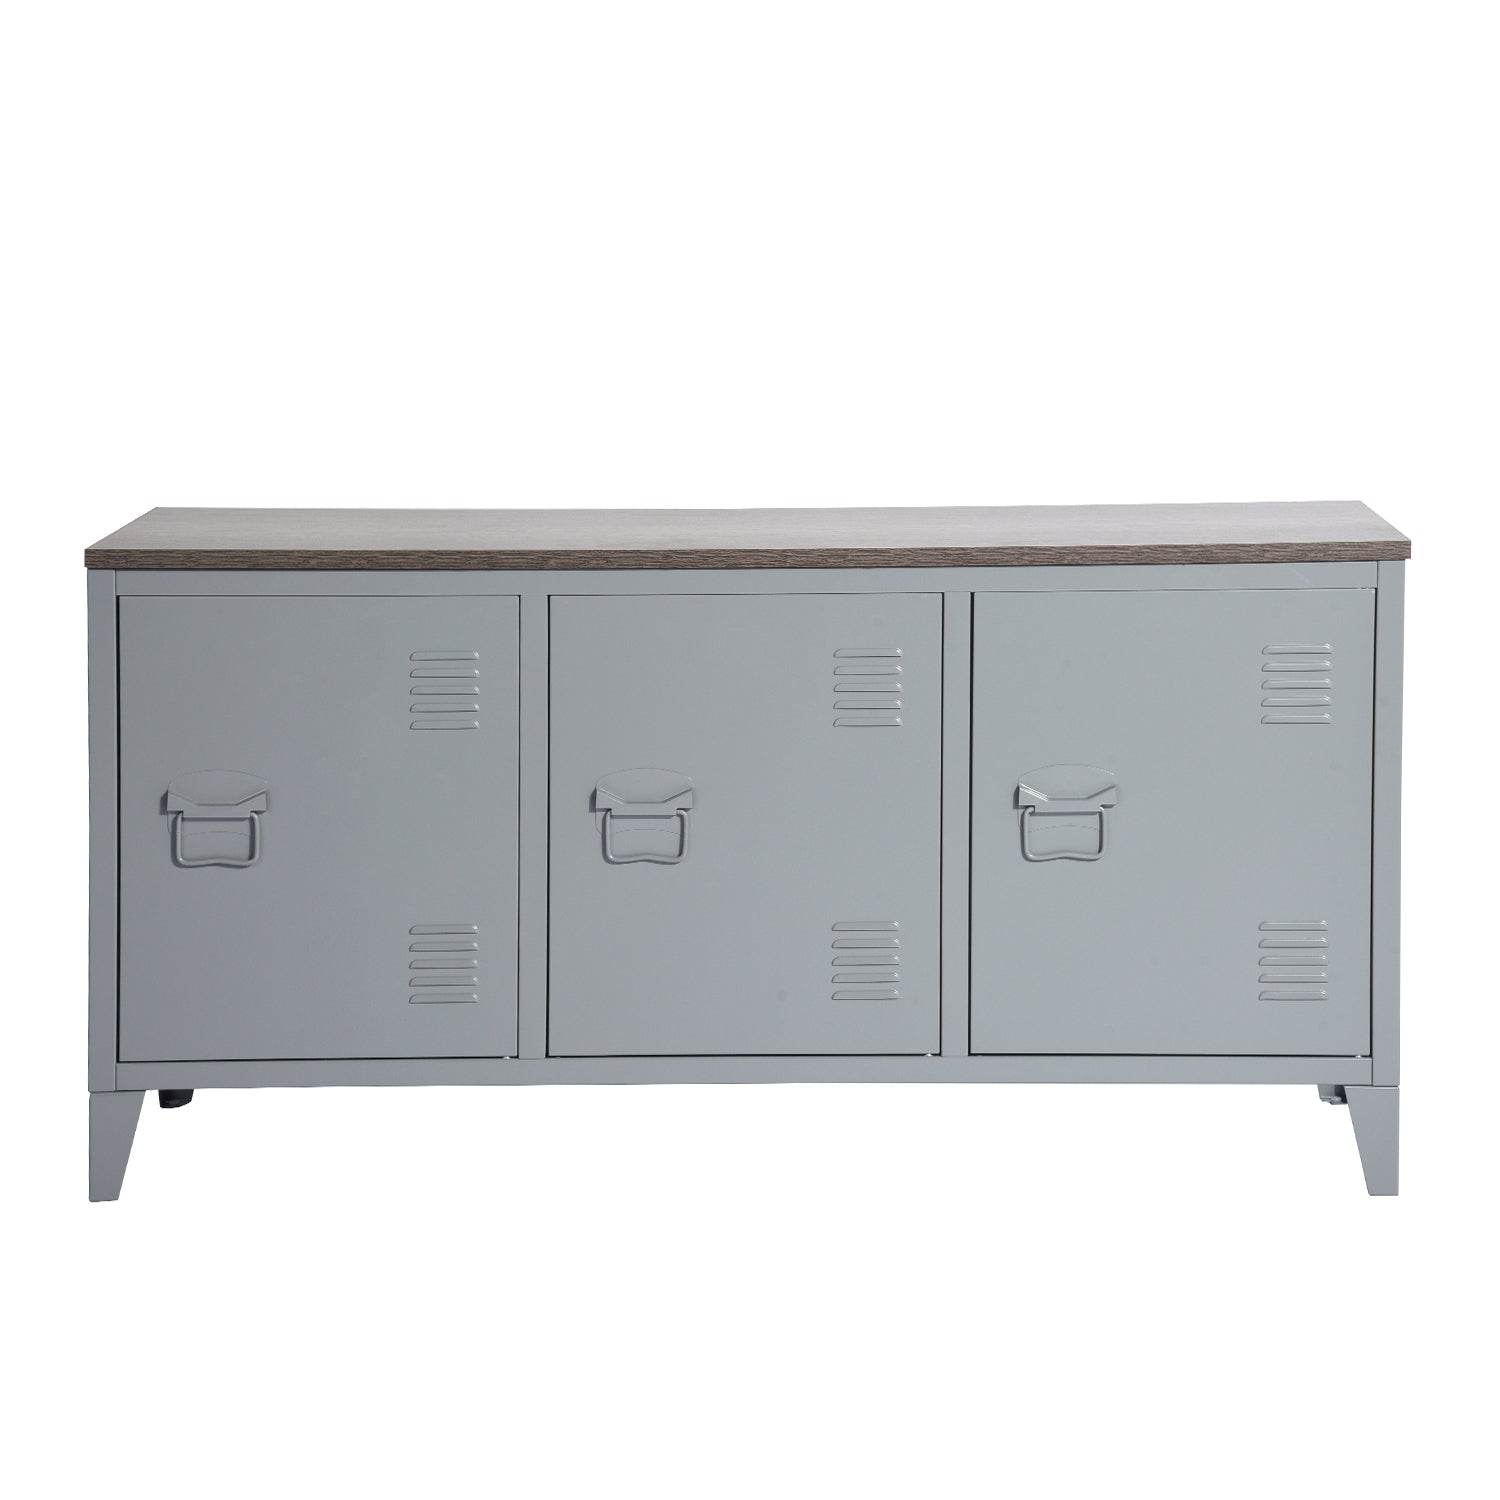 Matapouri Grey Mdft Accent Chests / Cabinets